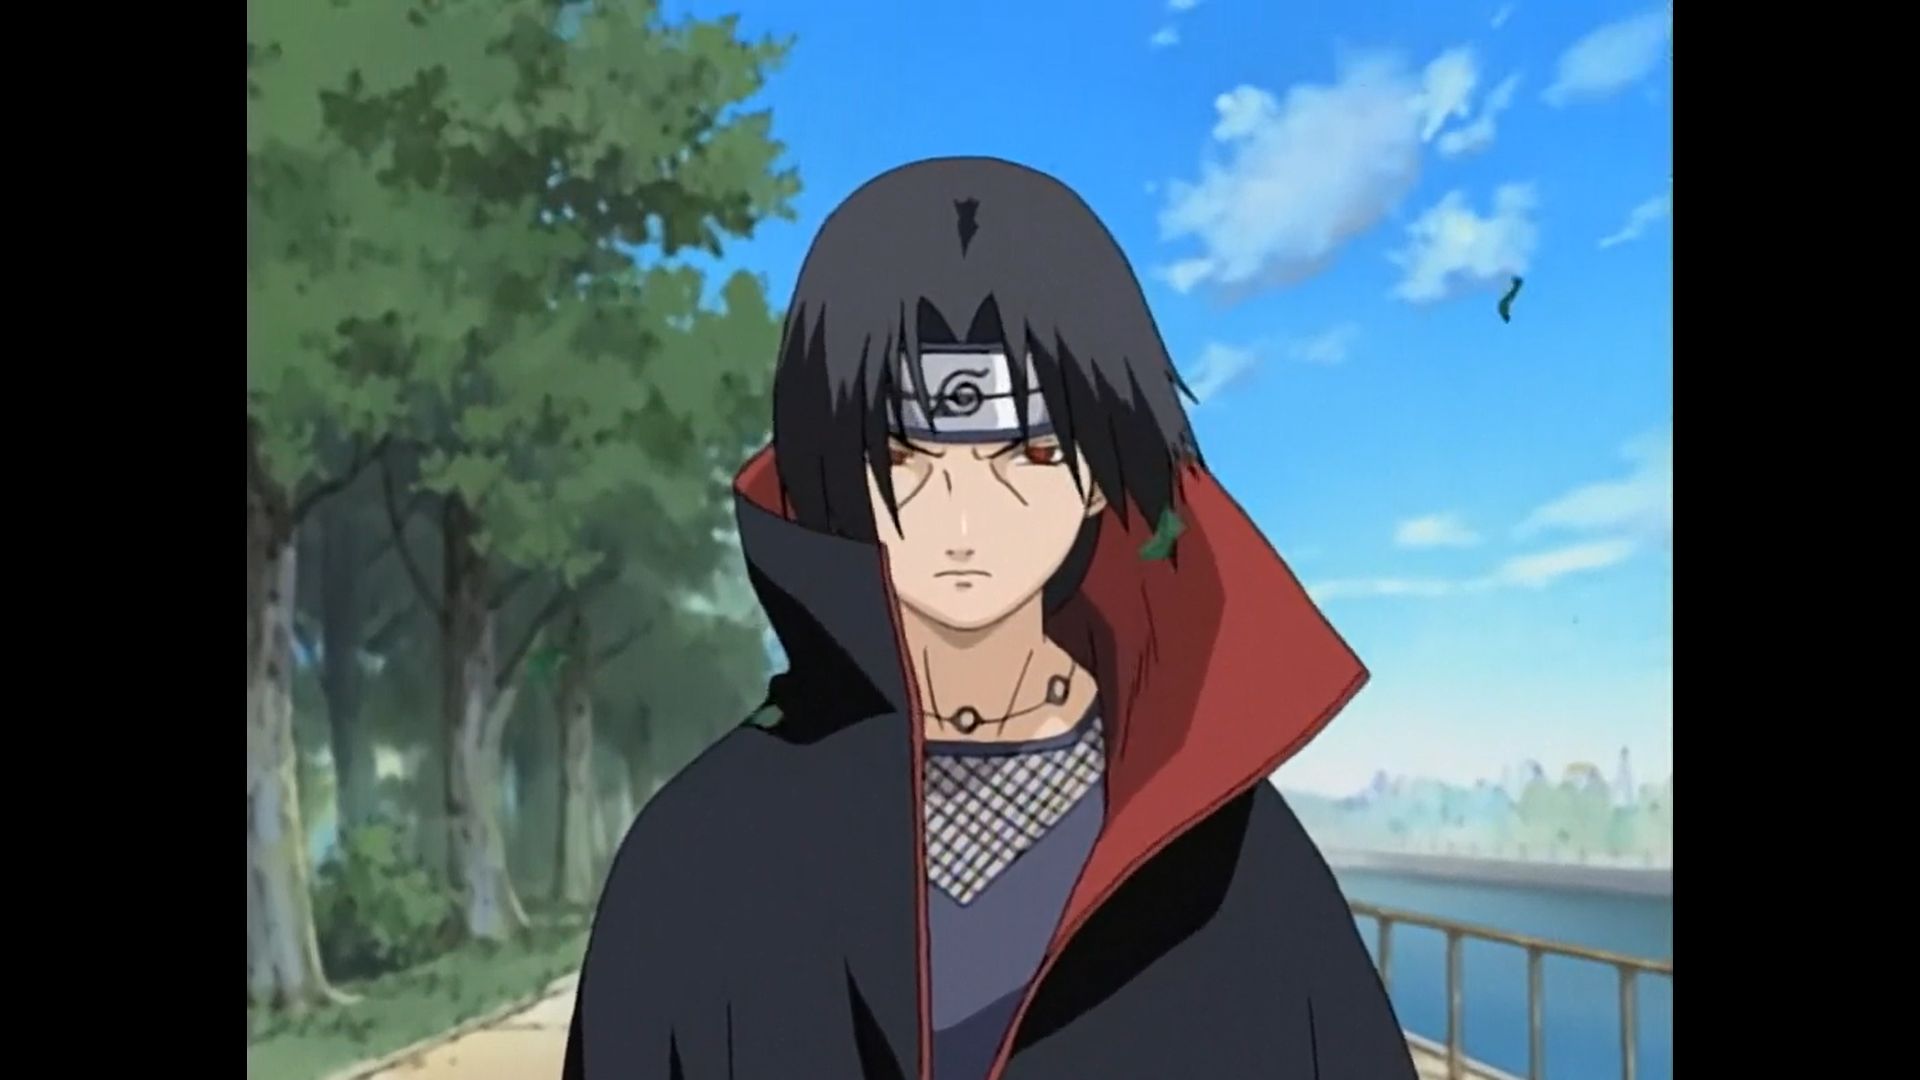 Itachi Uchiha from Naruto is one of the coolest anime boys. 